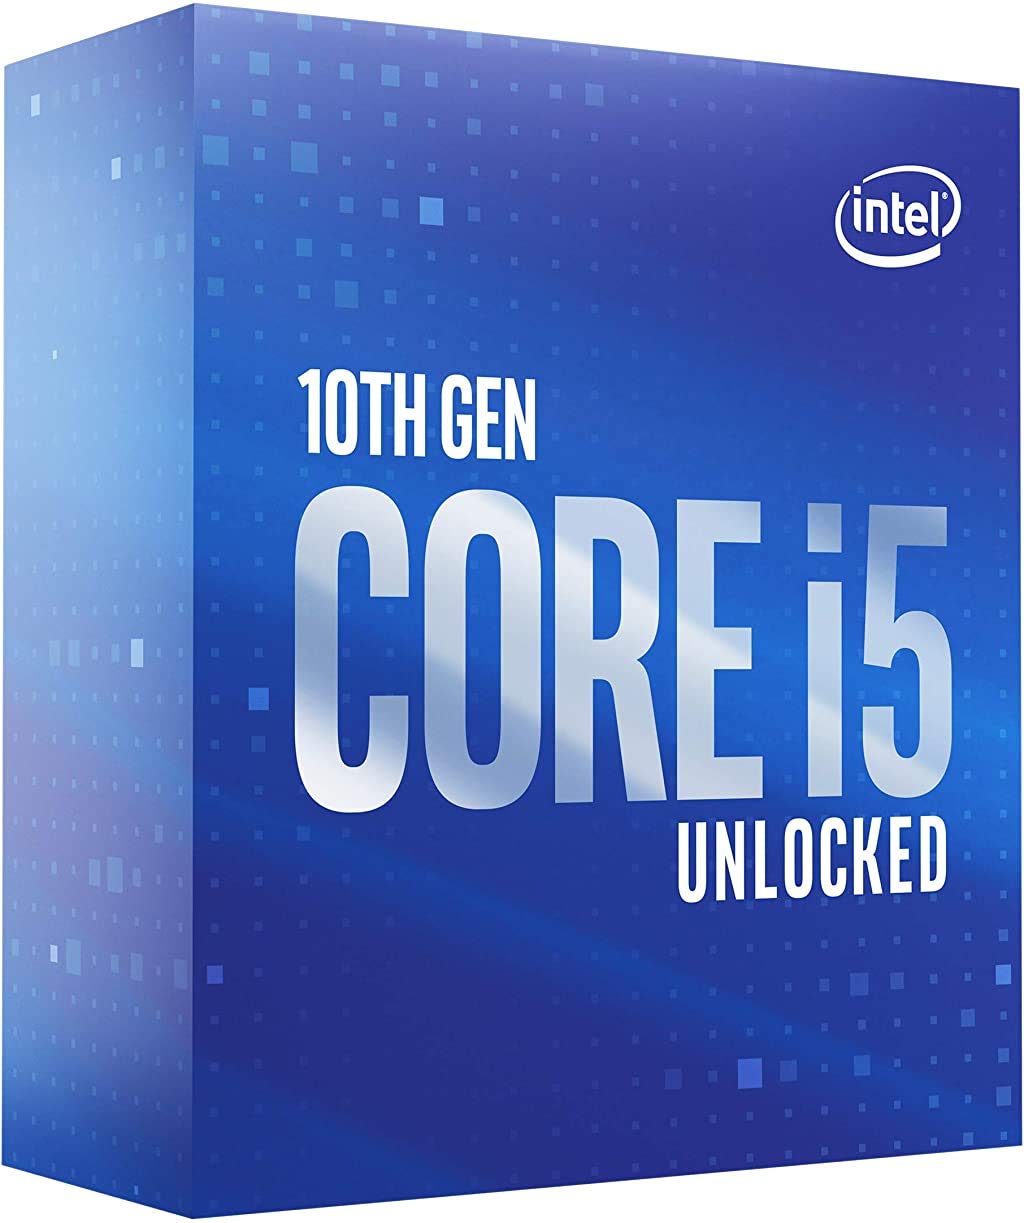 Knowing the i5 10th generation Processor